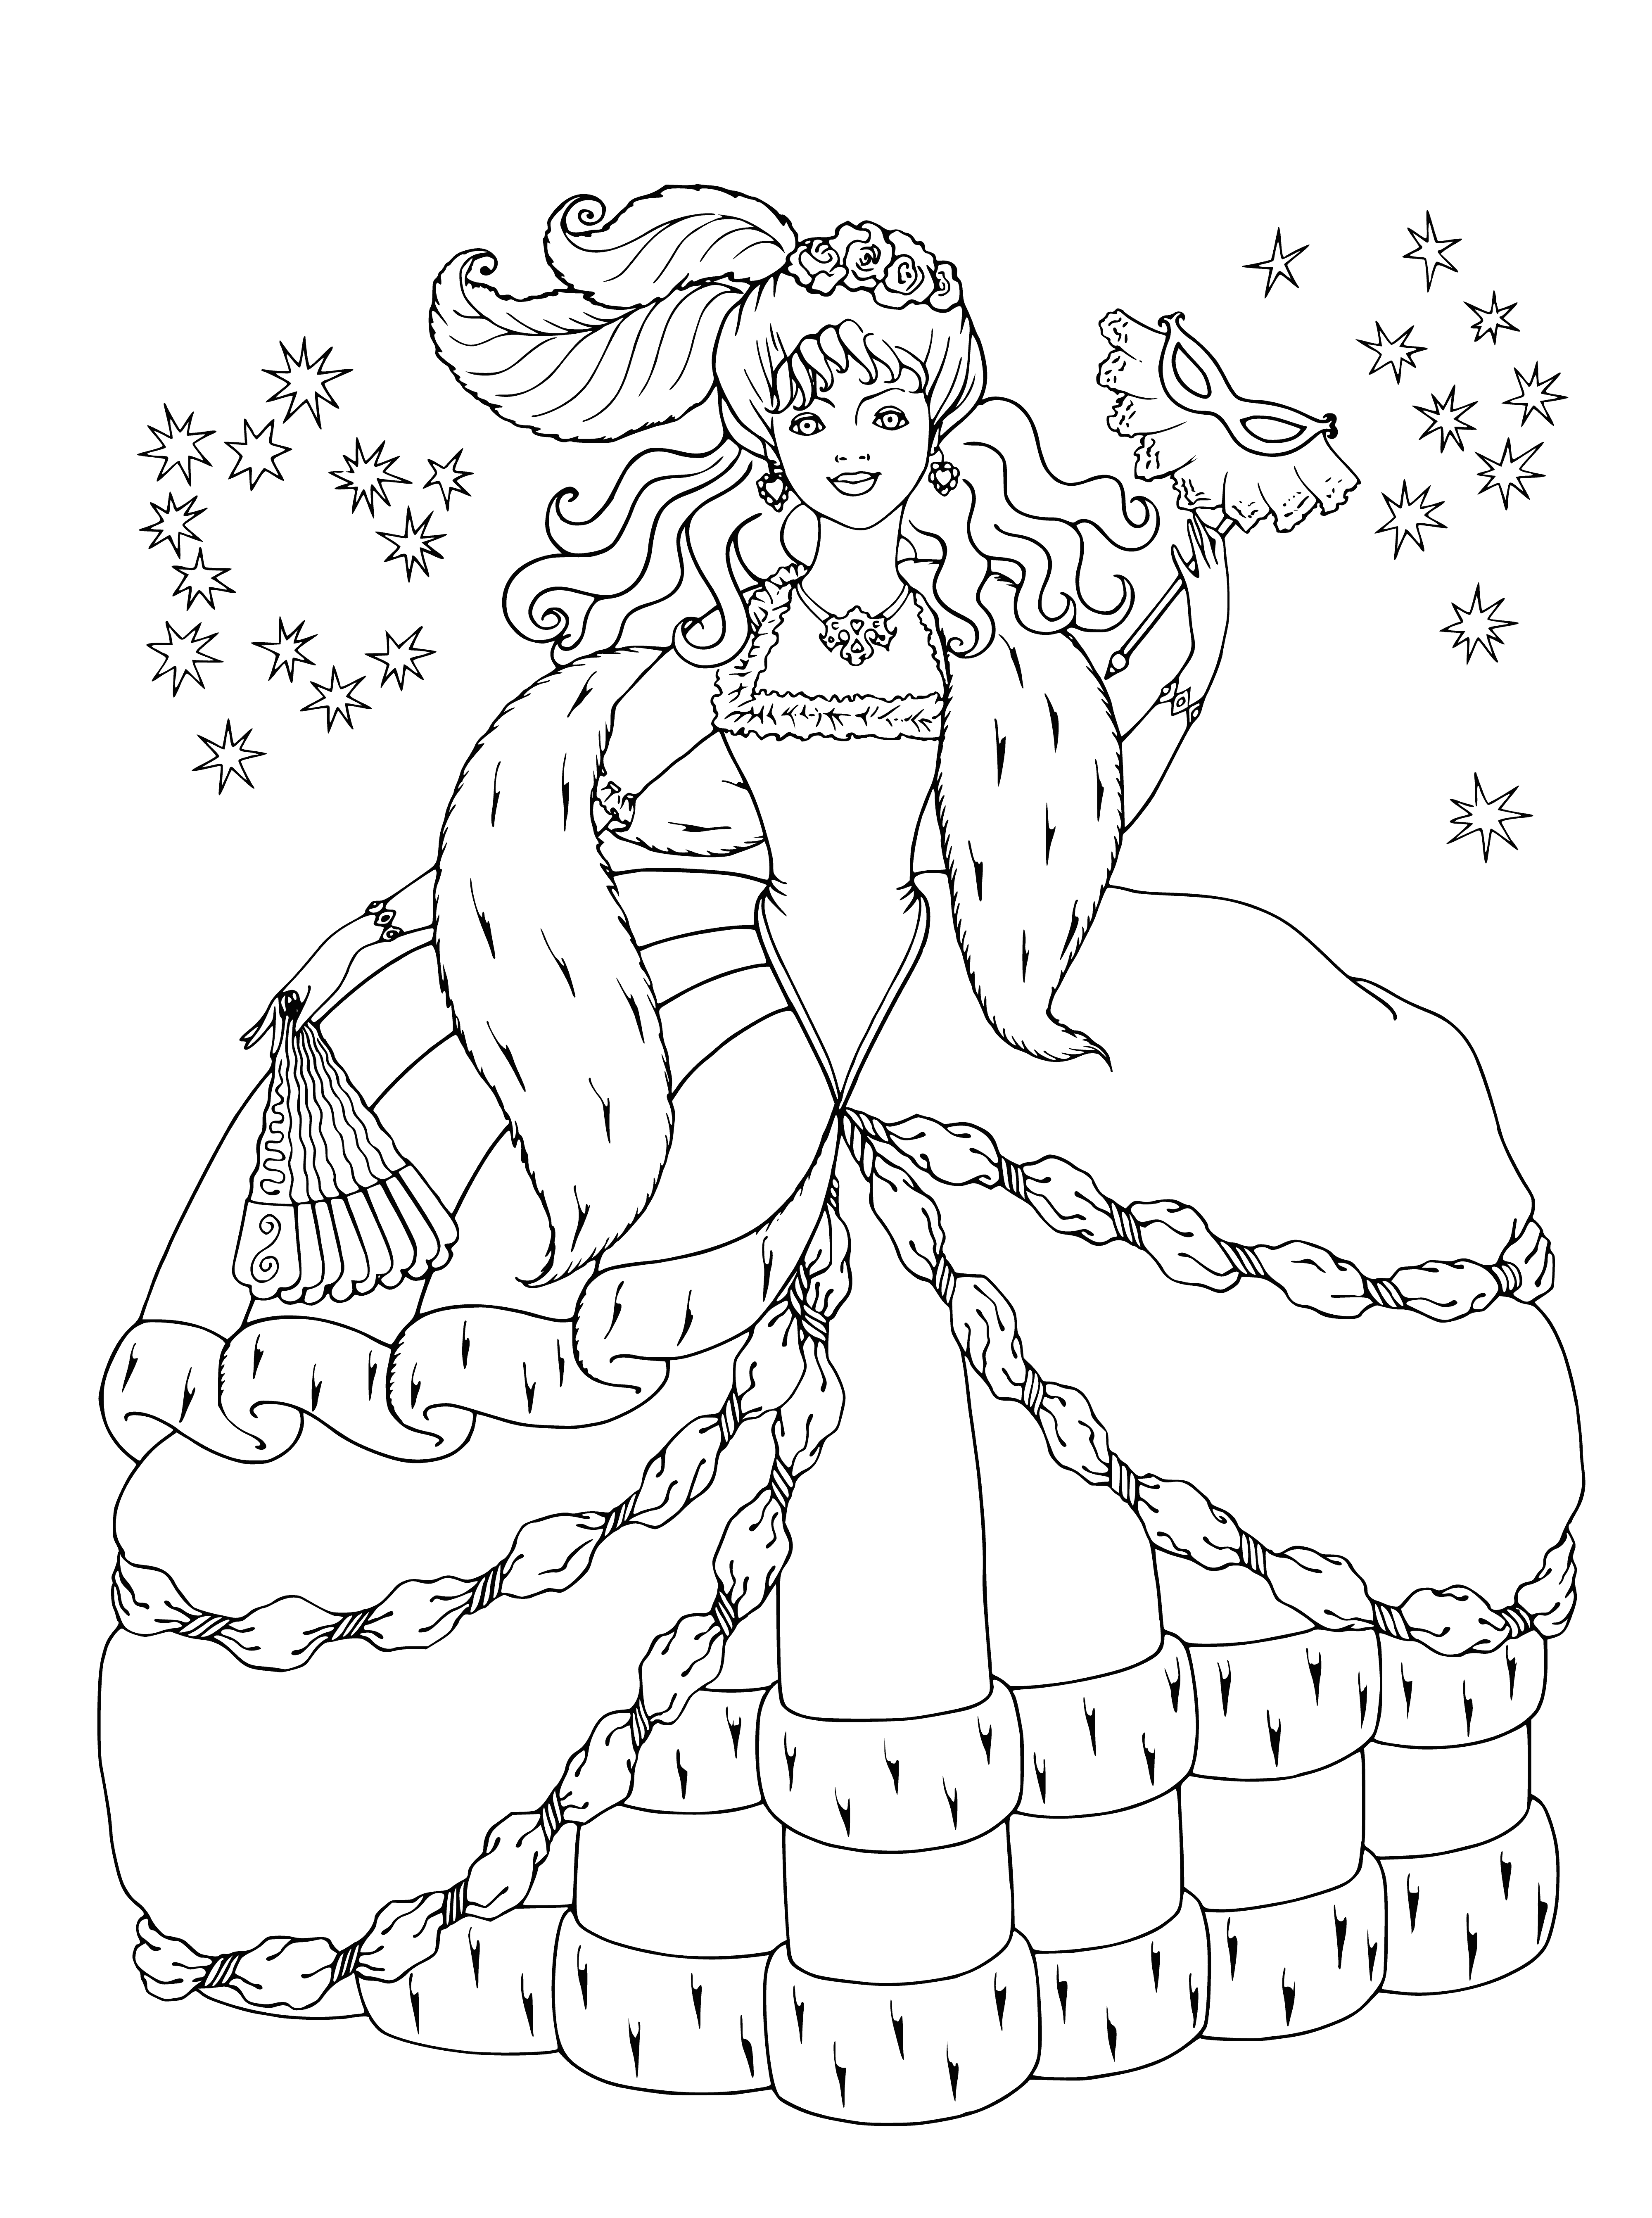 coloring page: Princess at a ball wearing white dress & crown, holding flowers in left hand. Sash reads "Princess".